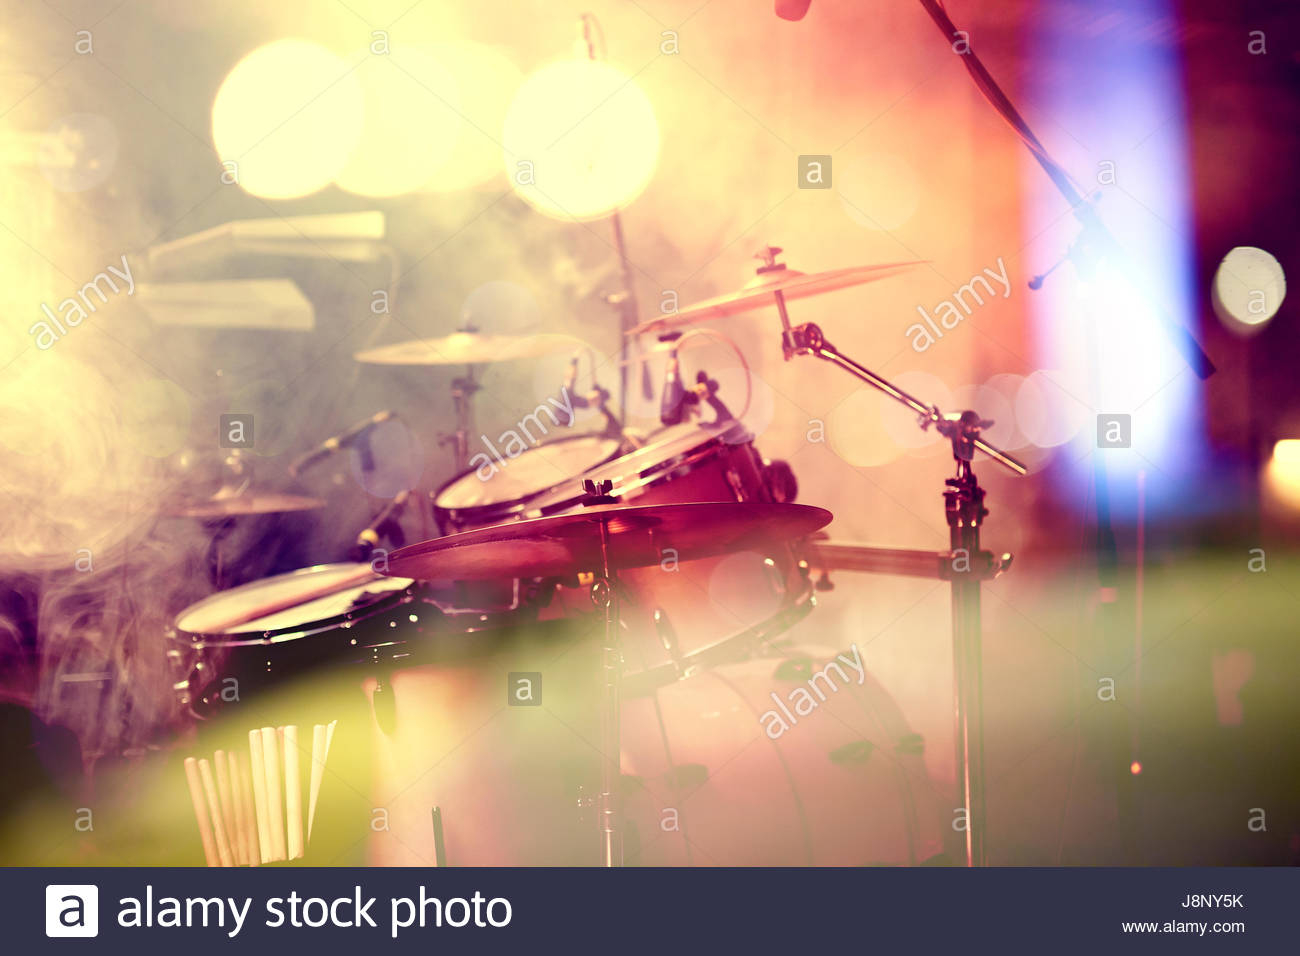 Live Music Background Drum On Stage Concert And Night Lifestyle